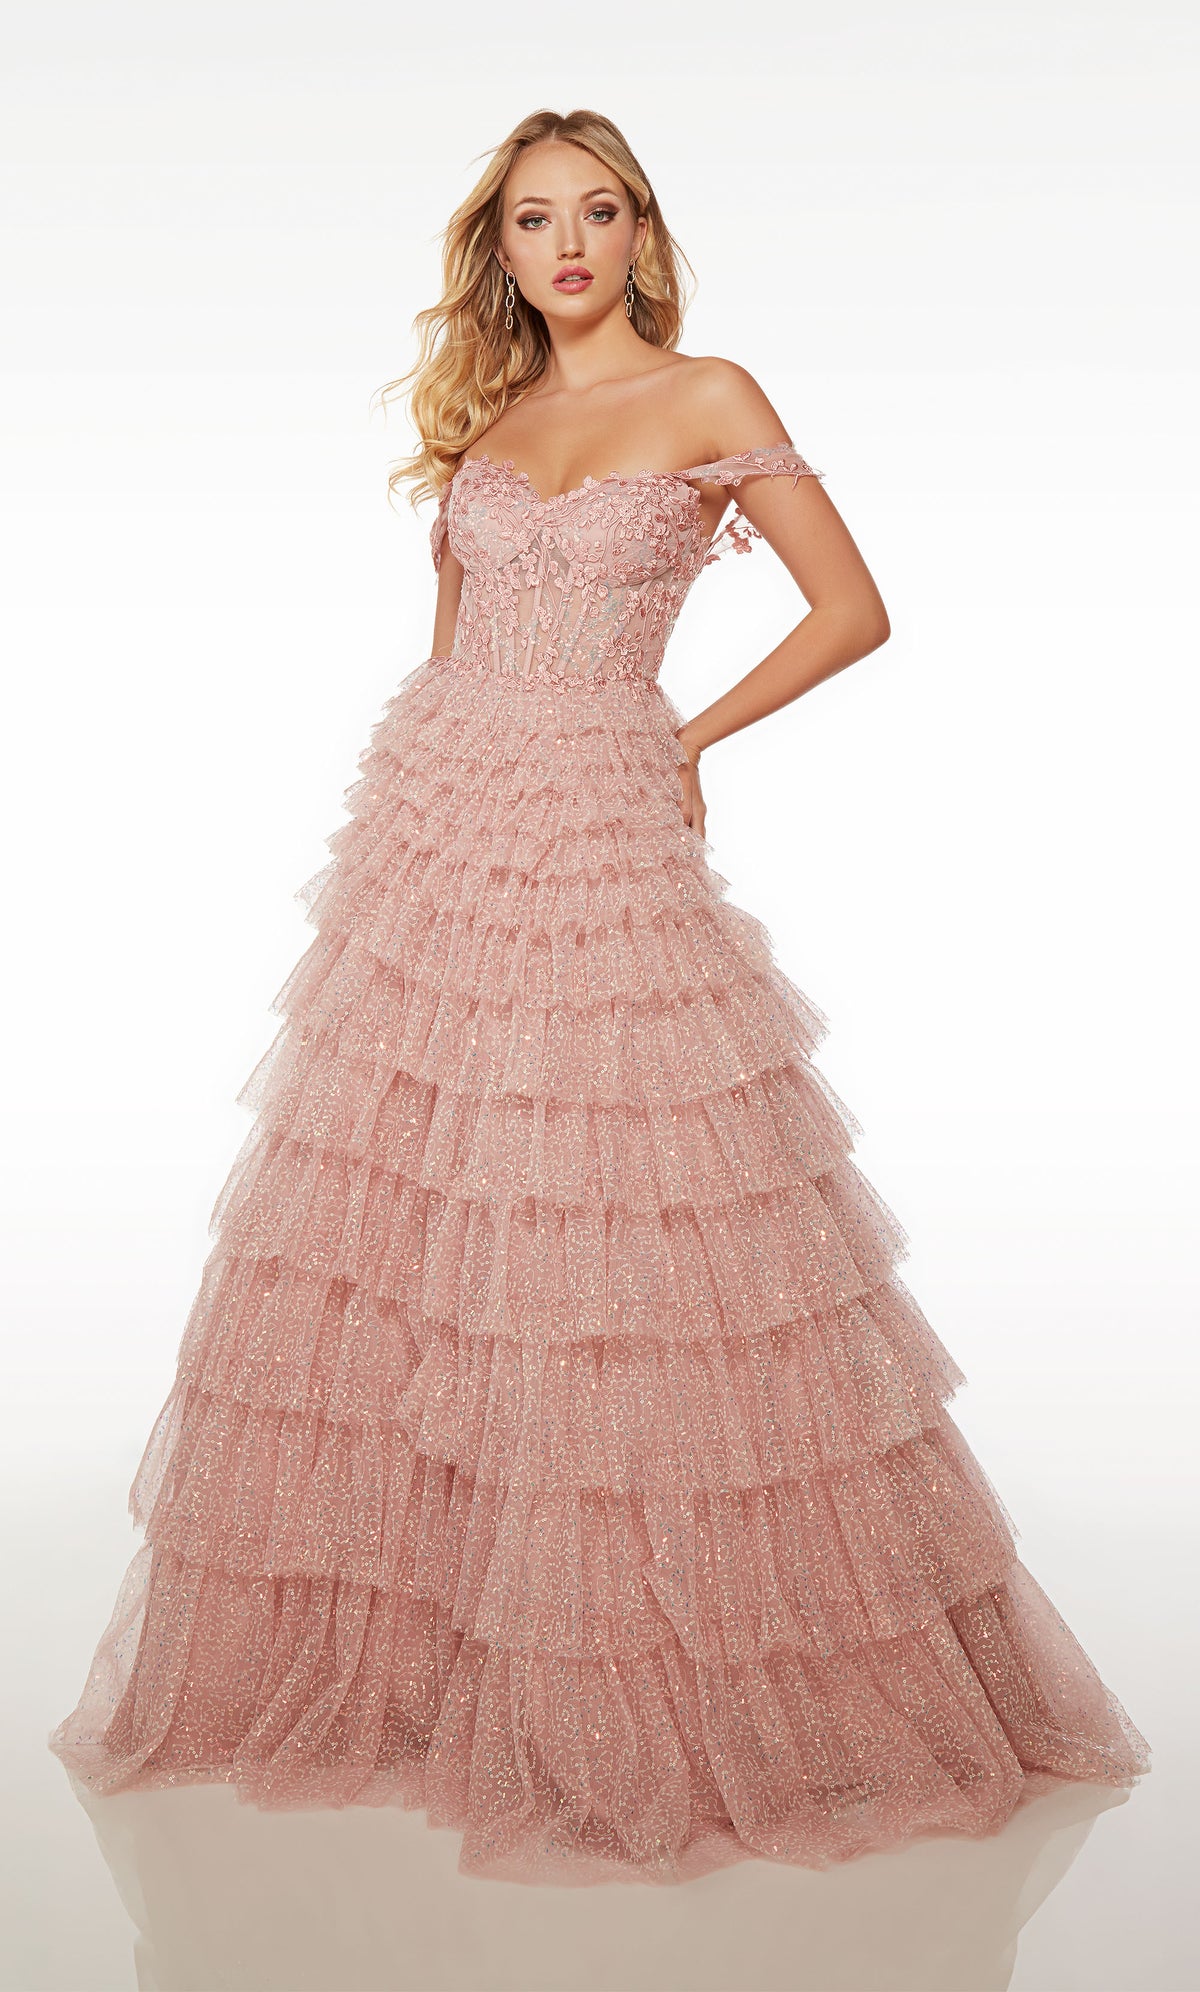 Pink off-shoulder glitter tulle ball gown: sheer floral lace corset, detachable straps, sequined lace ruffled skirt for an charming and stylish look.